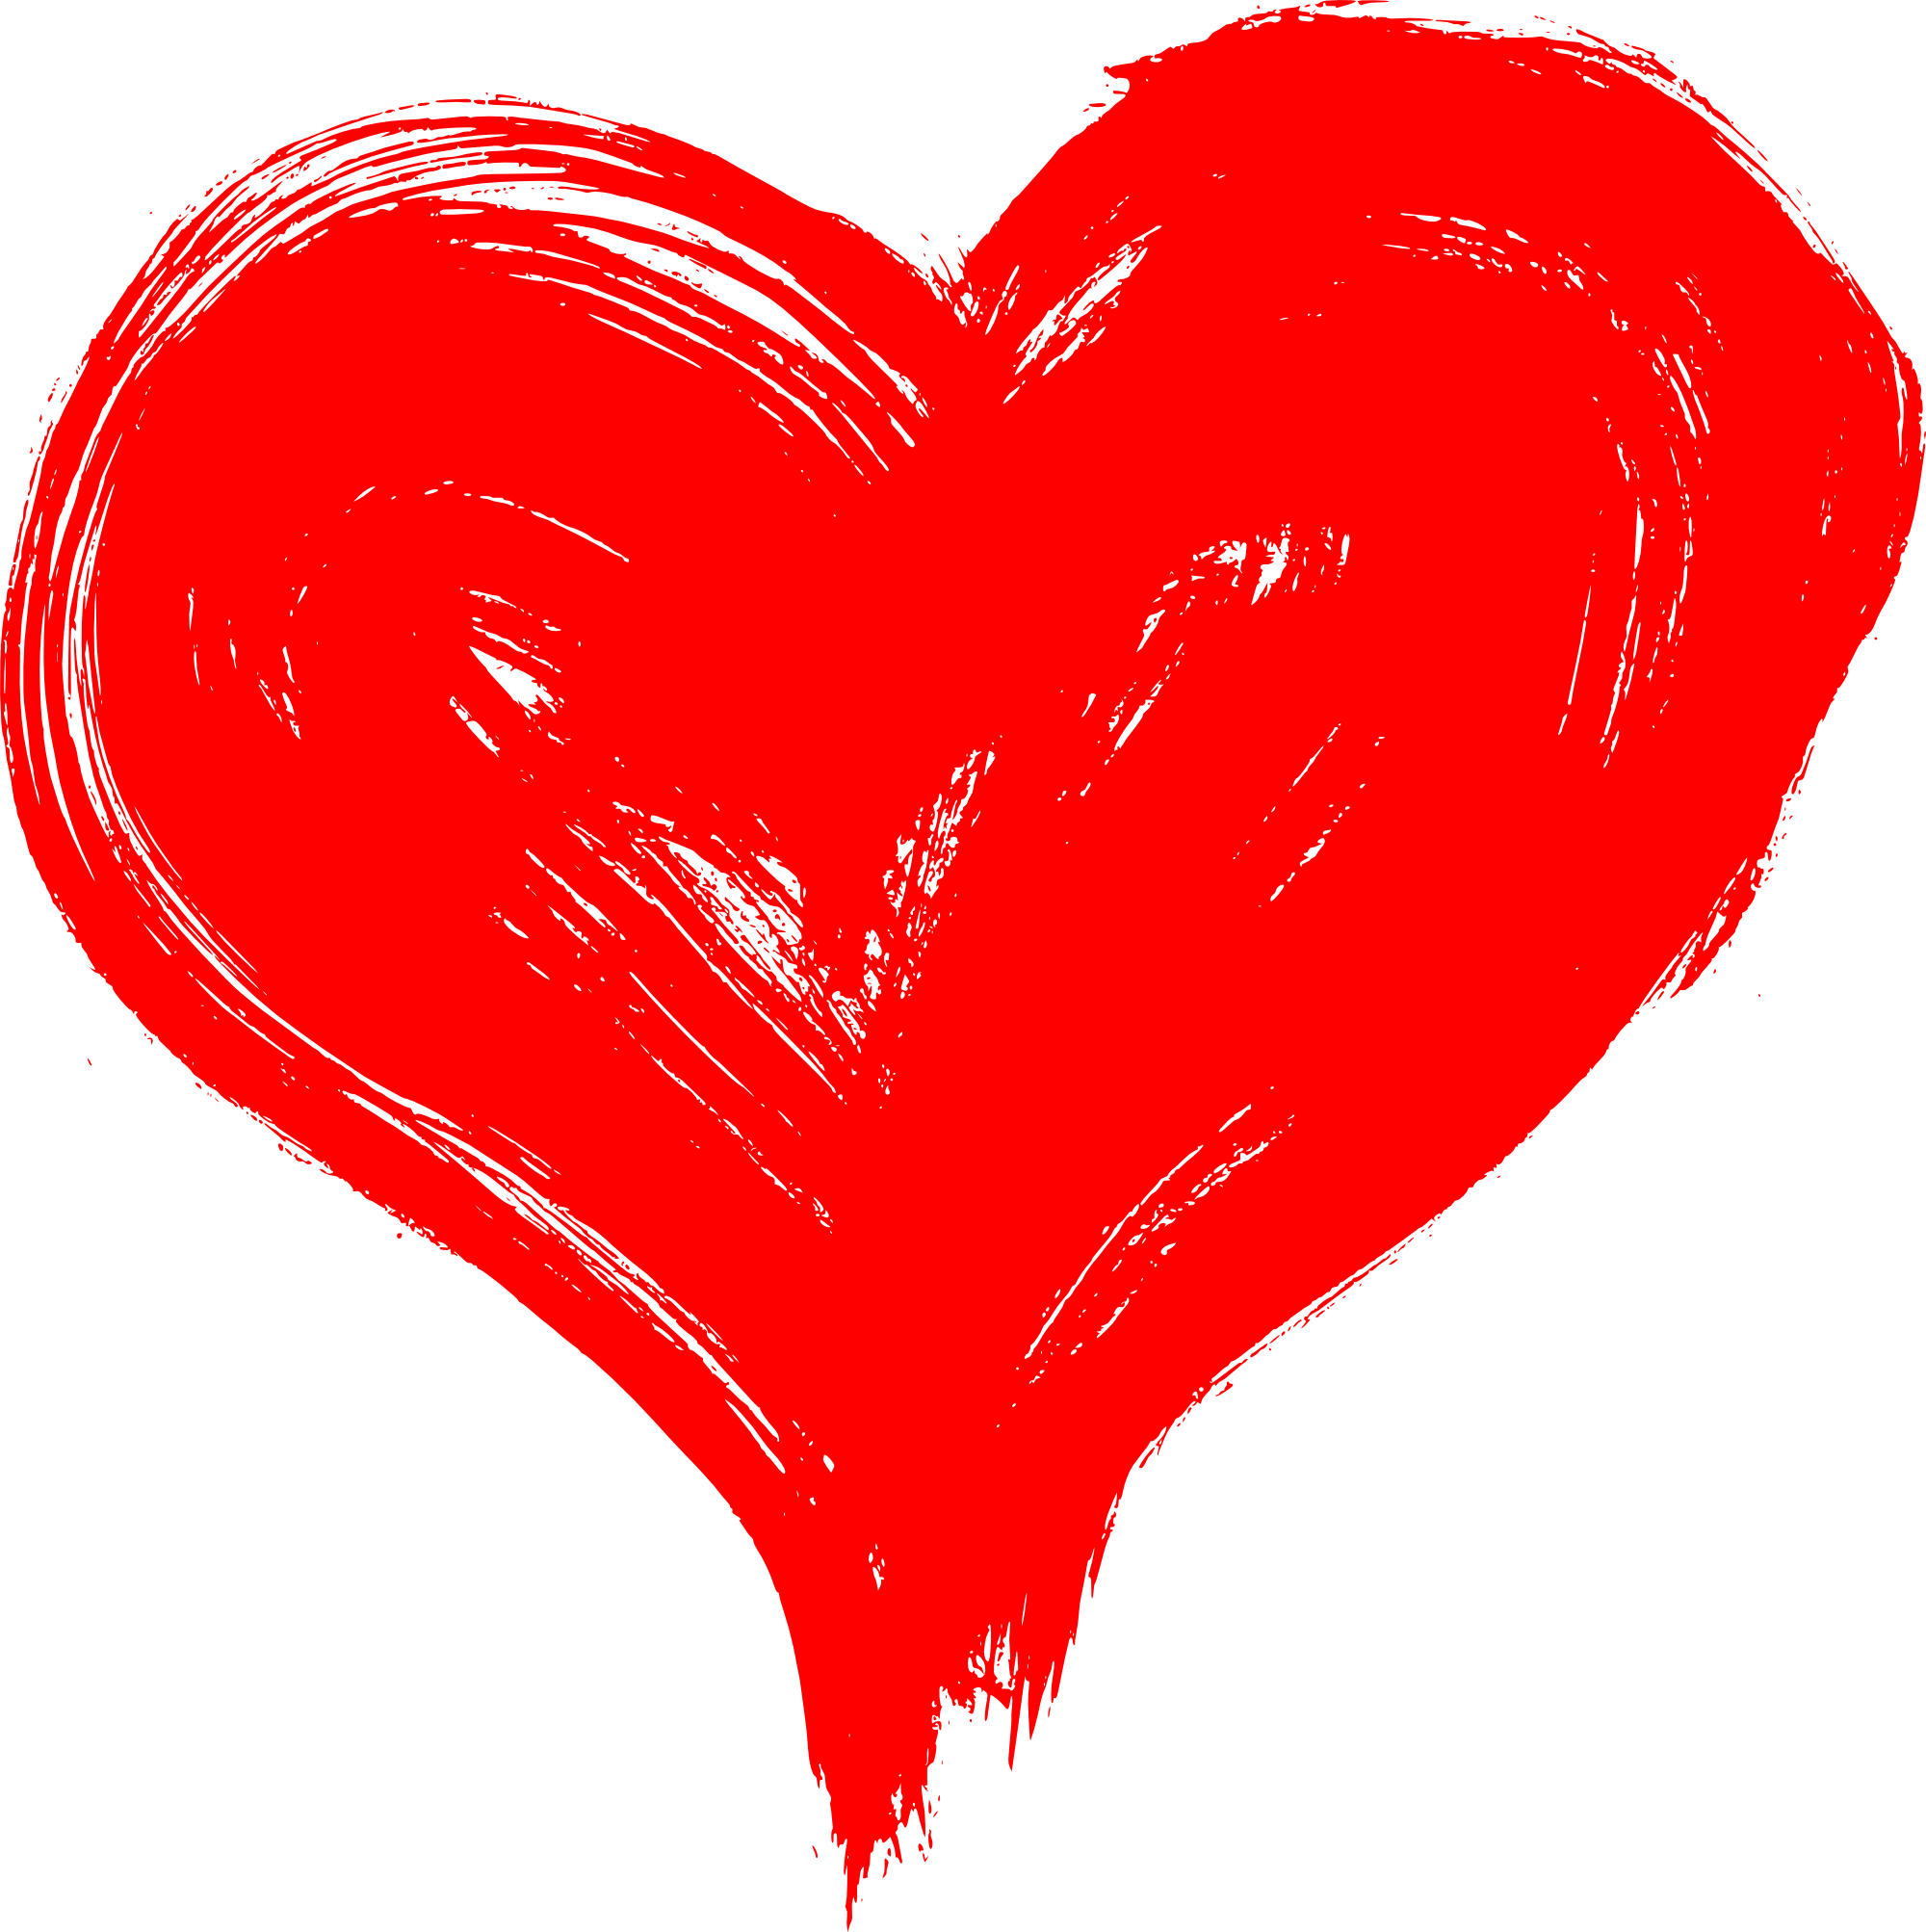 Free Heart Art Png, Download Free Heart Art Png png images, Free ...